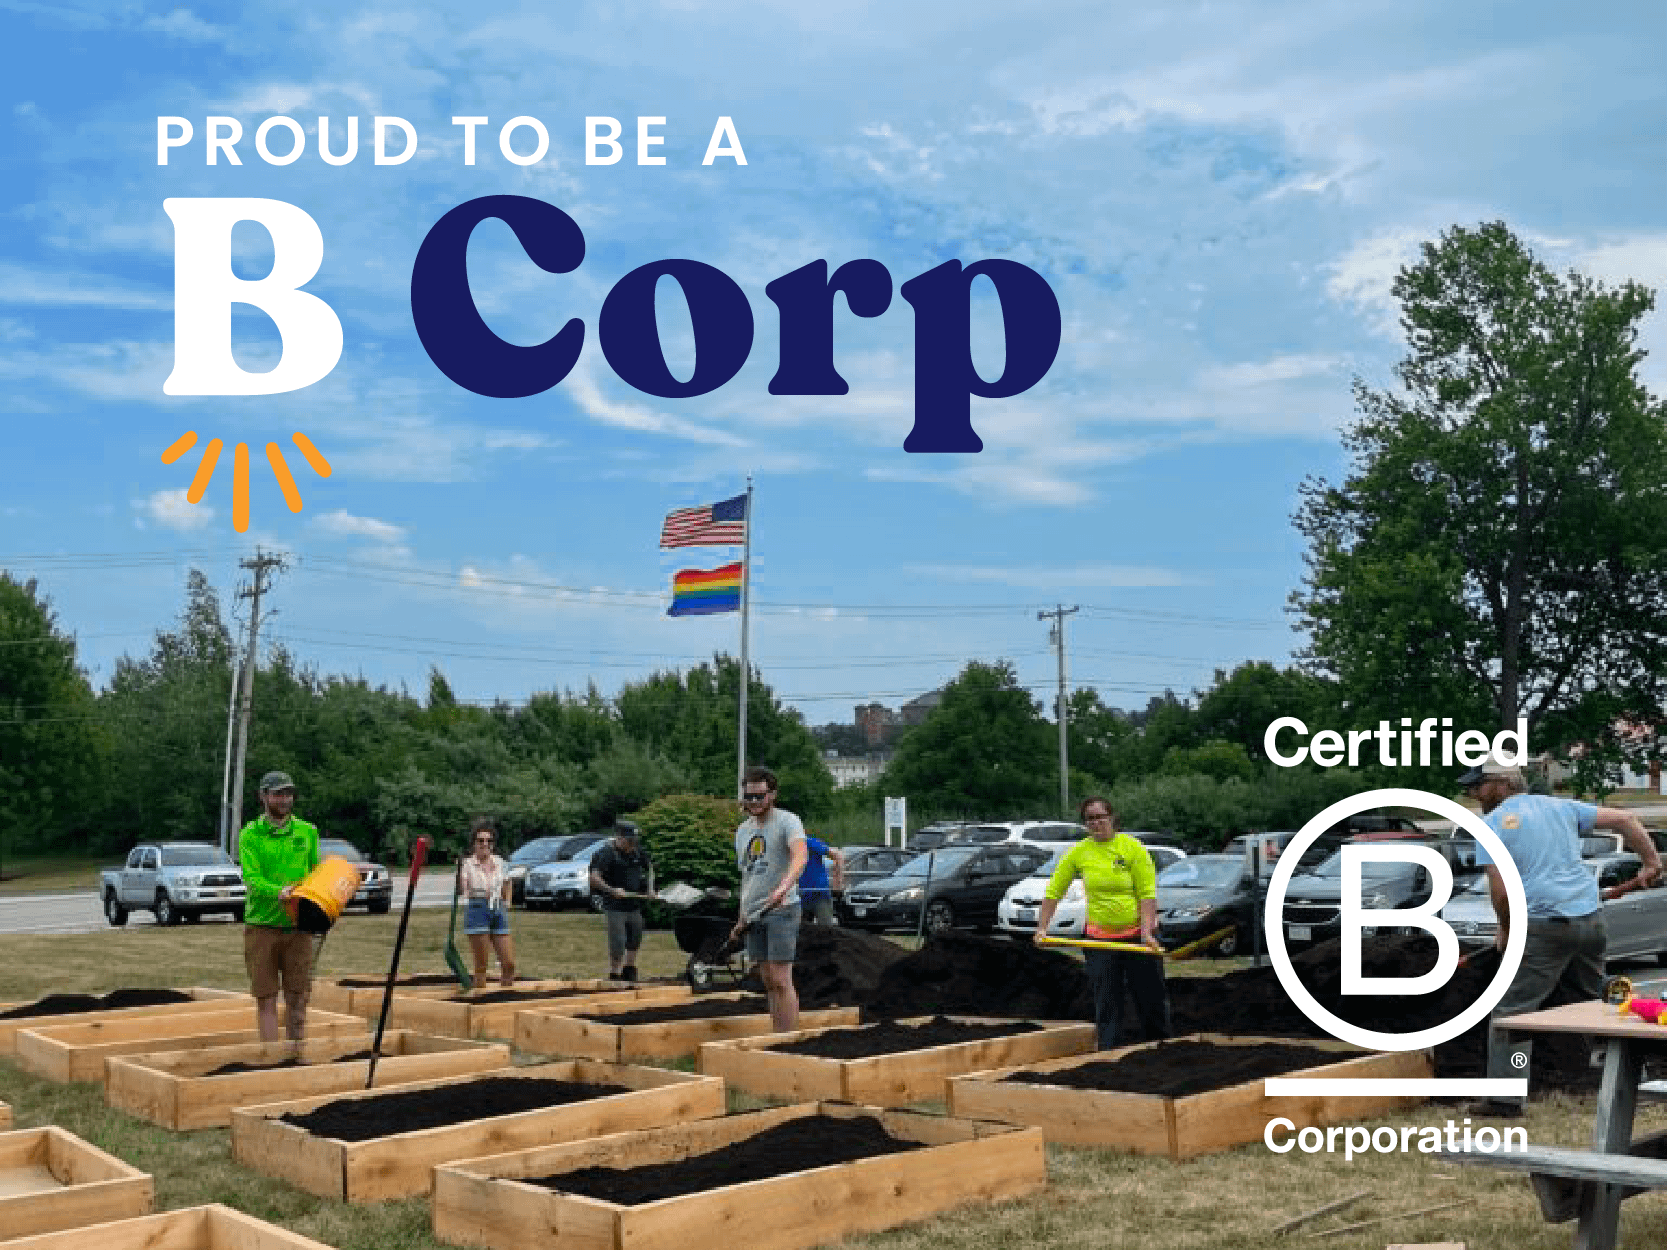 We Have a New B Corp Score!